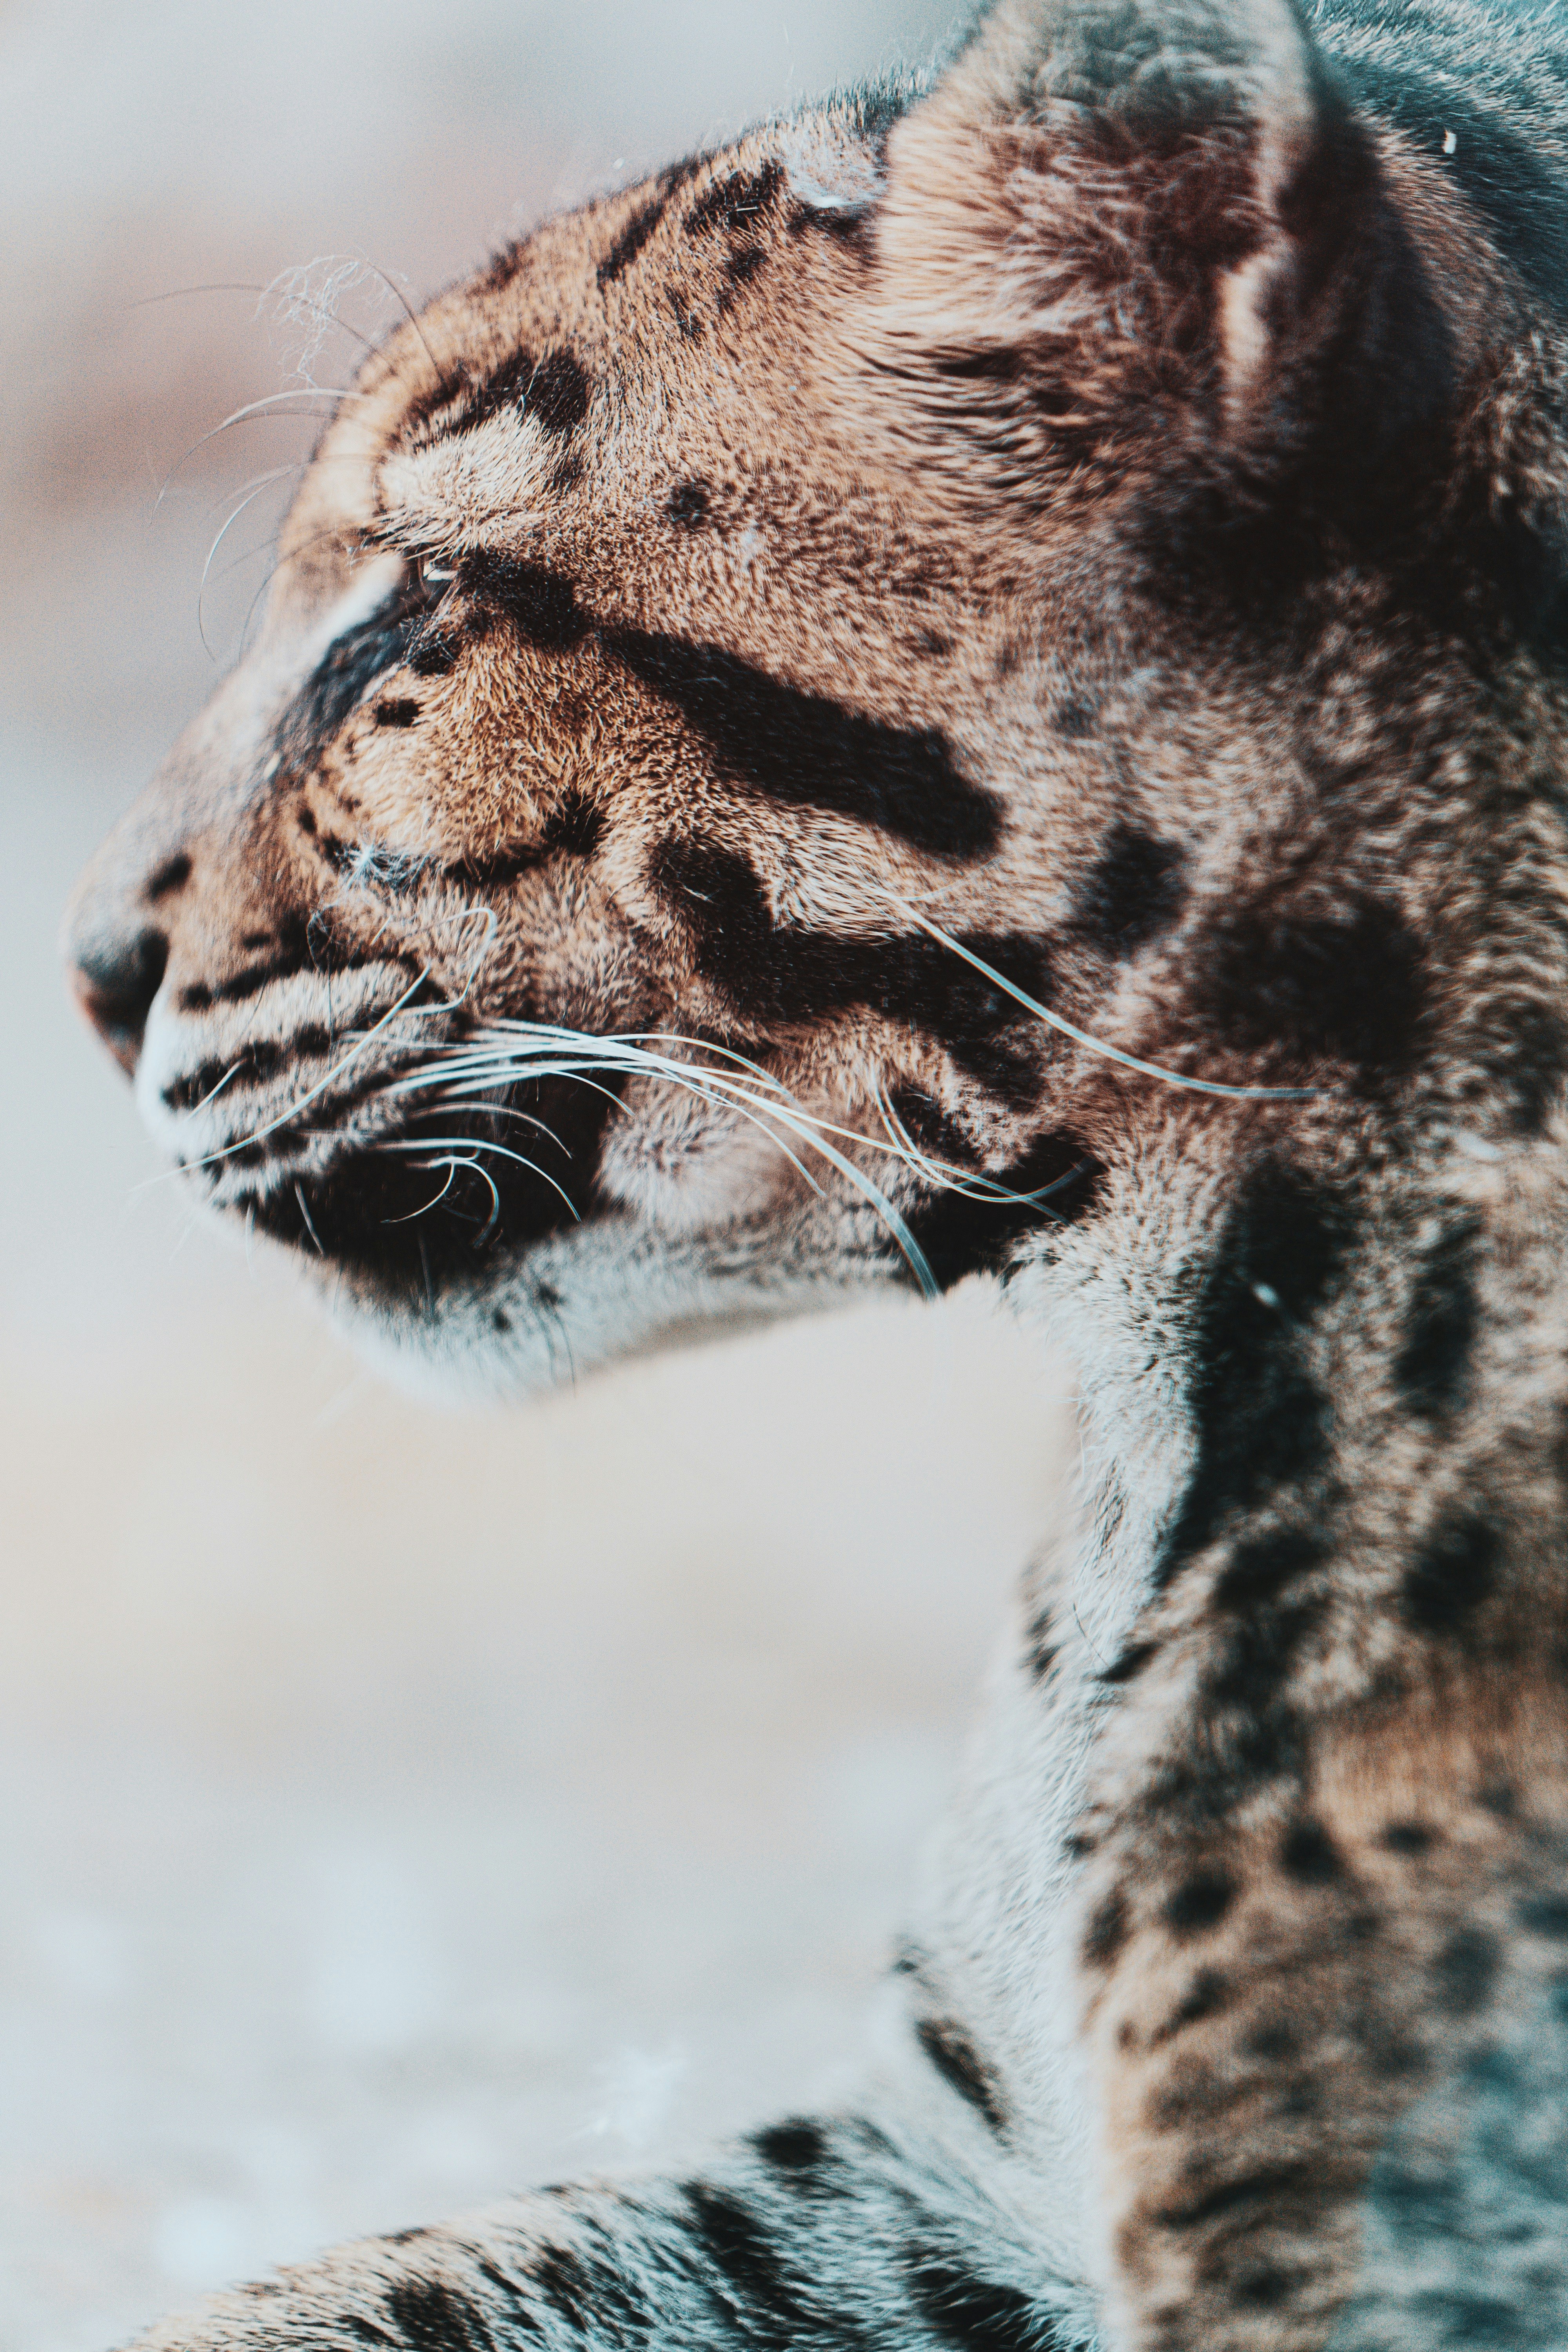 brown and black leopard in close up photography